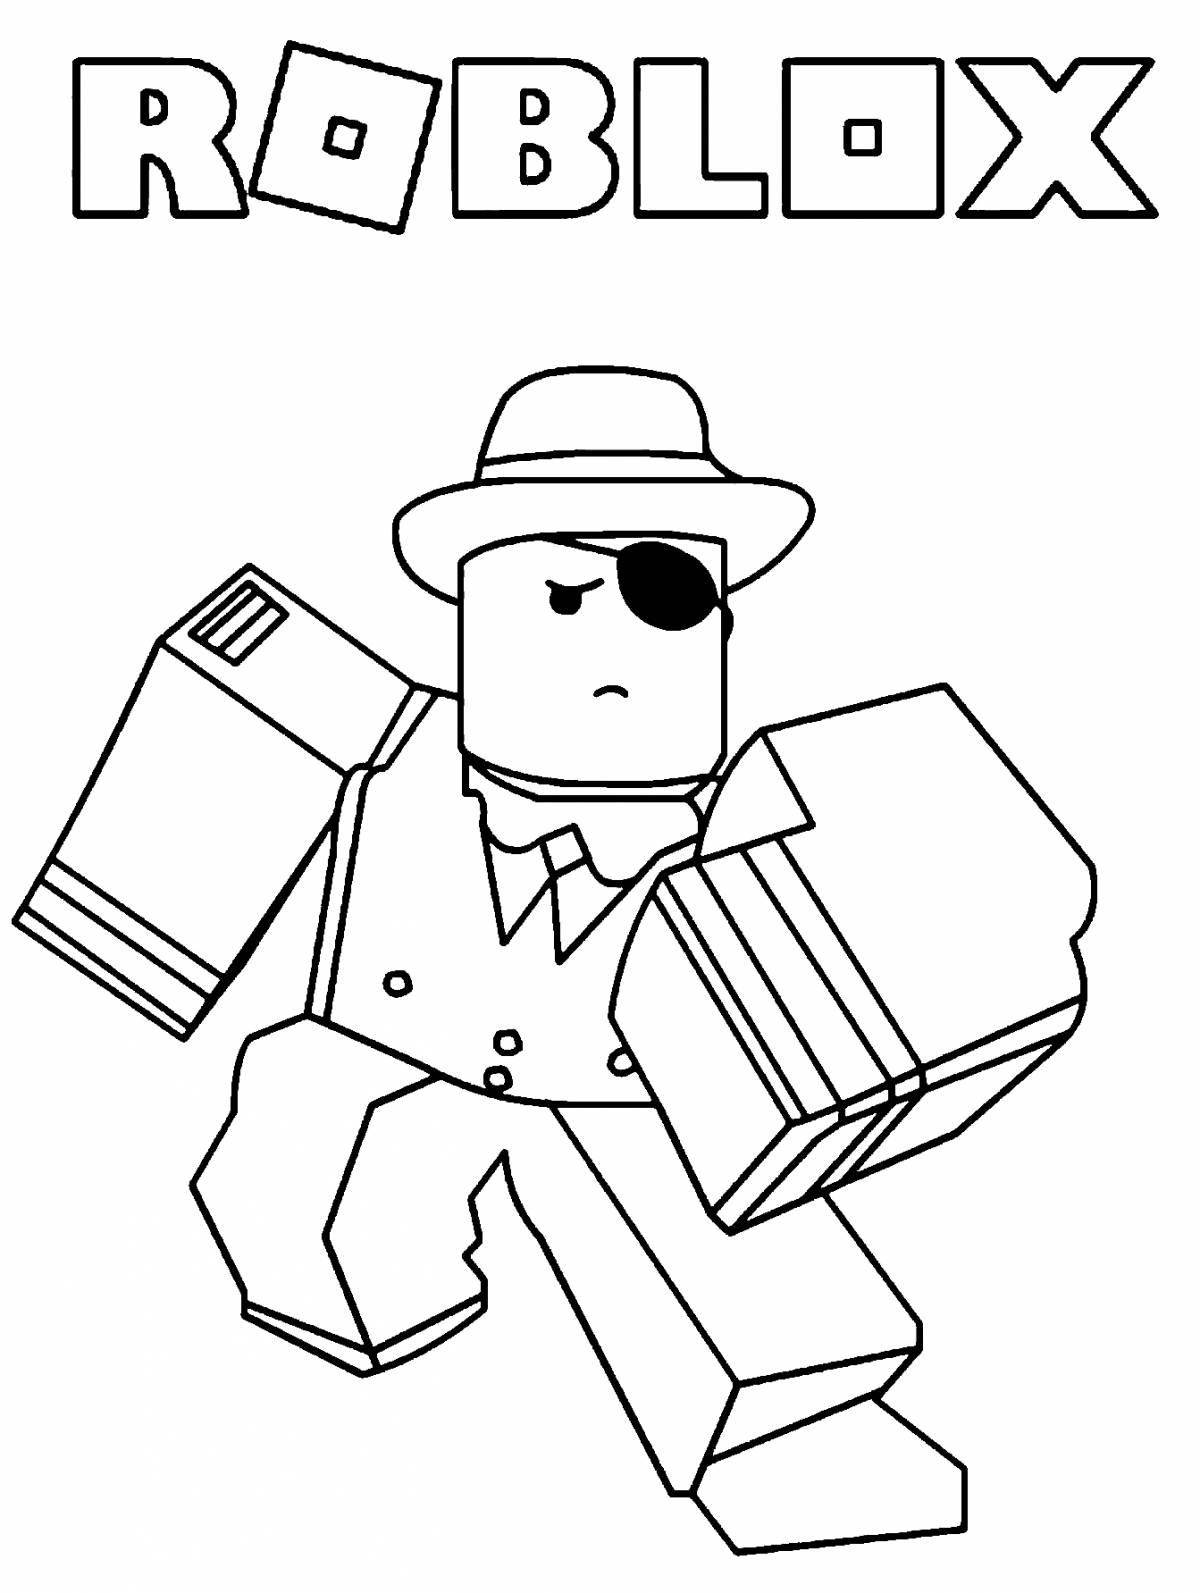 Roblox sweet coloring